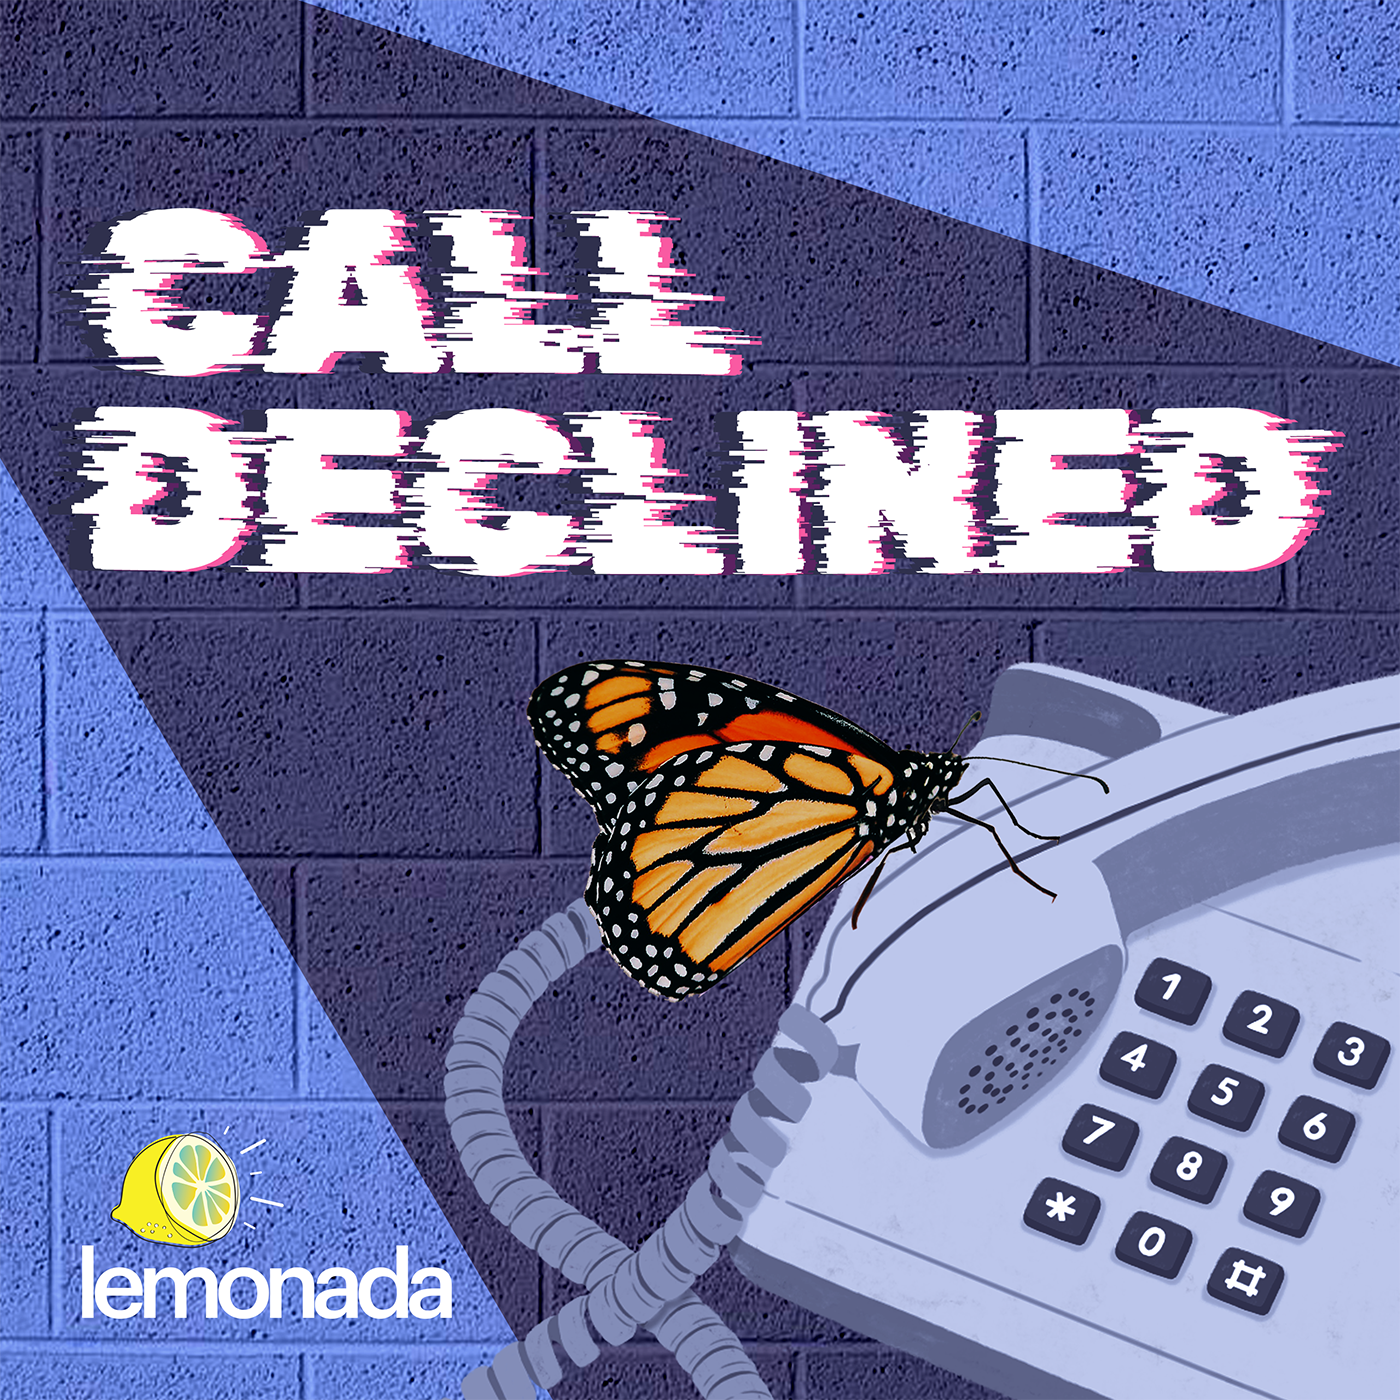 Call Declined: Imaginary Resources